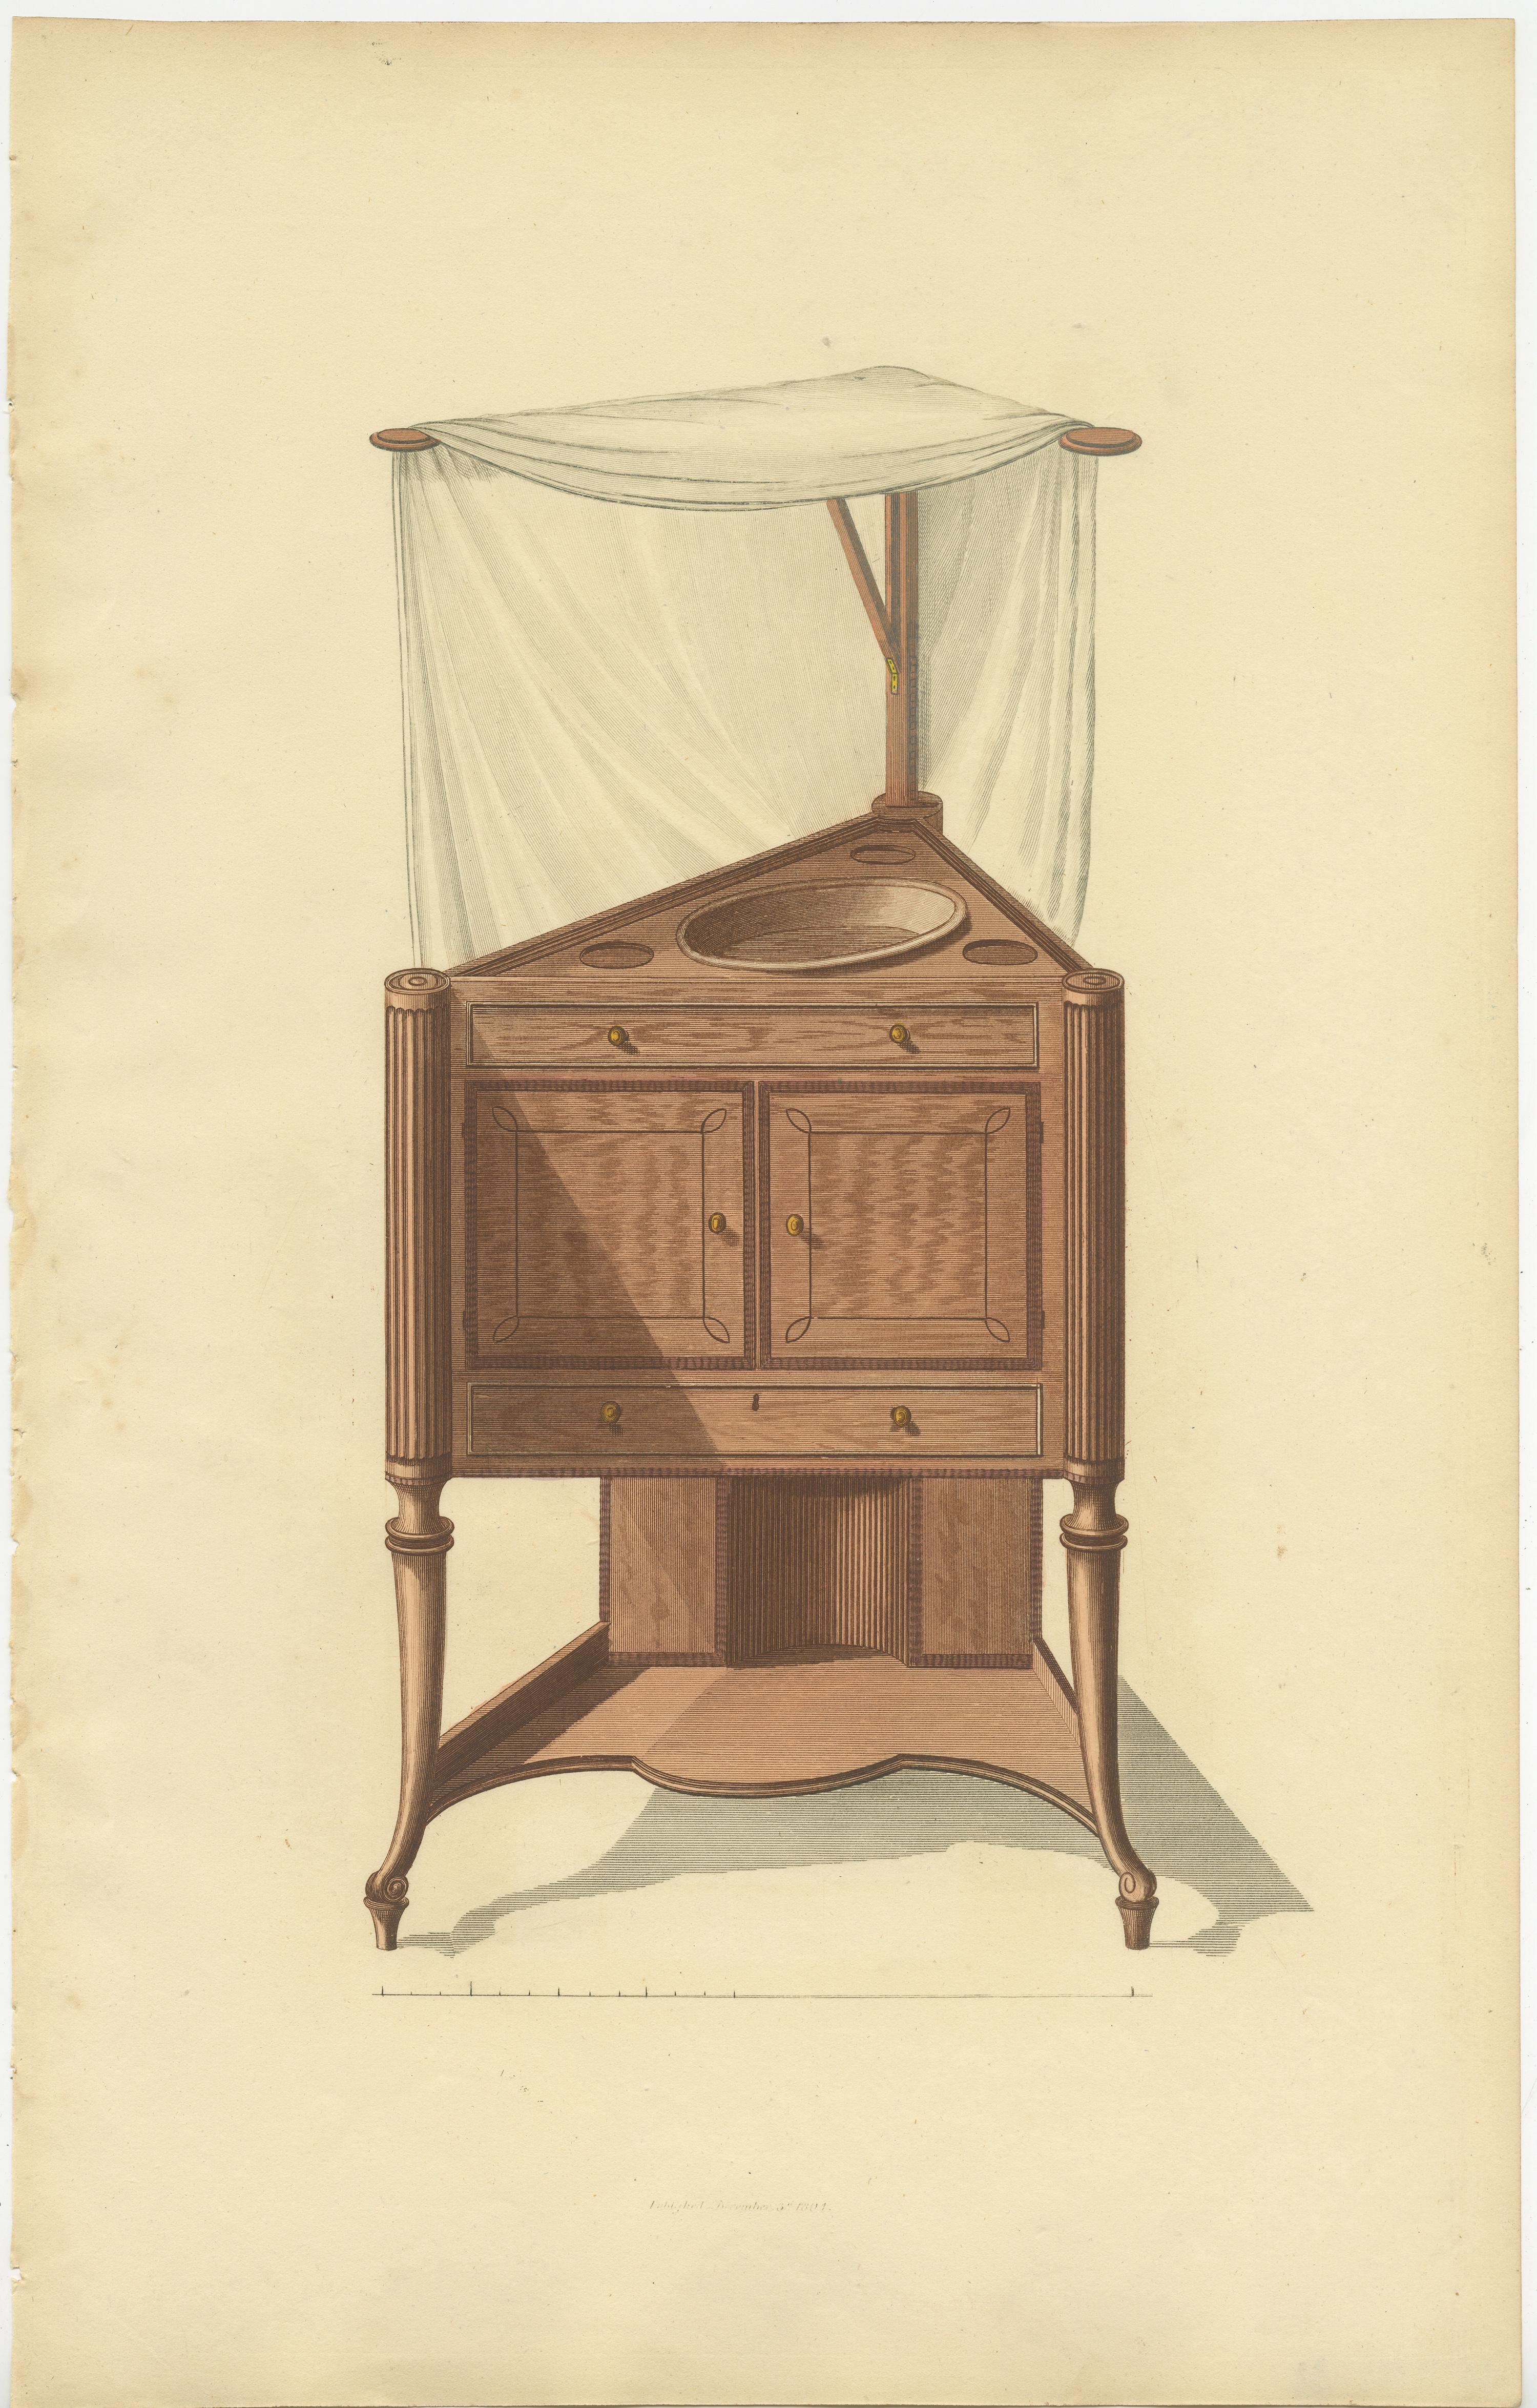 Set of 10 Antique Prints of Cabinets and Other Furniture by Sheraton '1805' For Sale 2